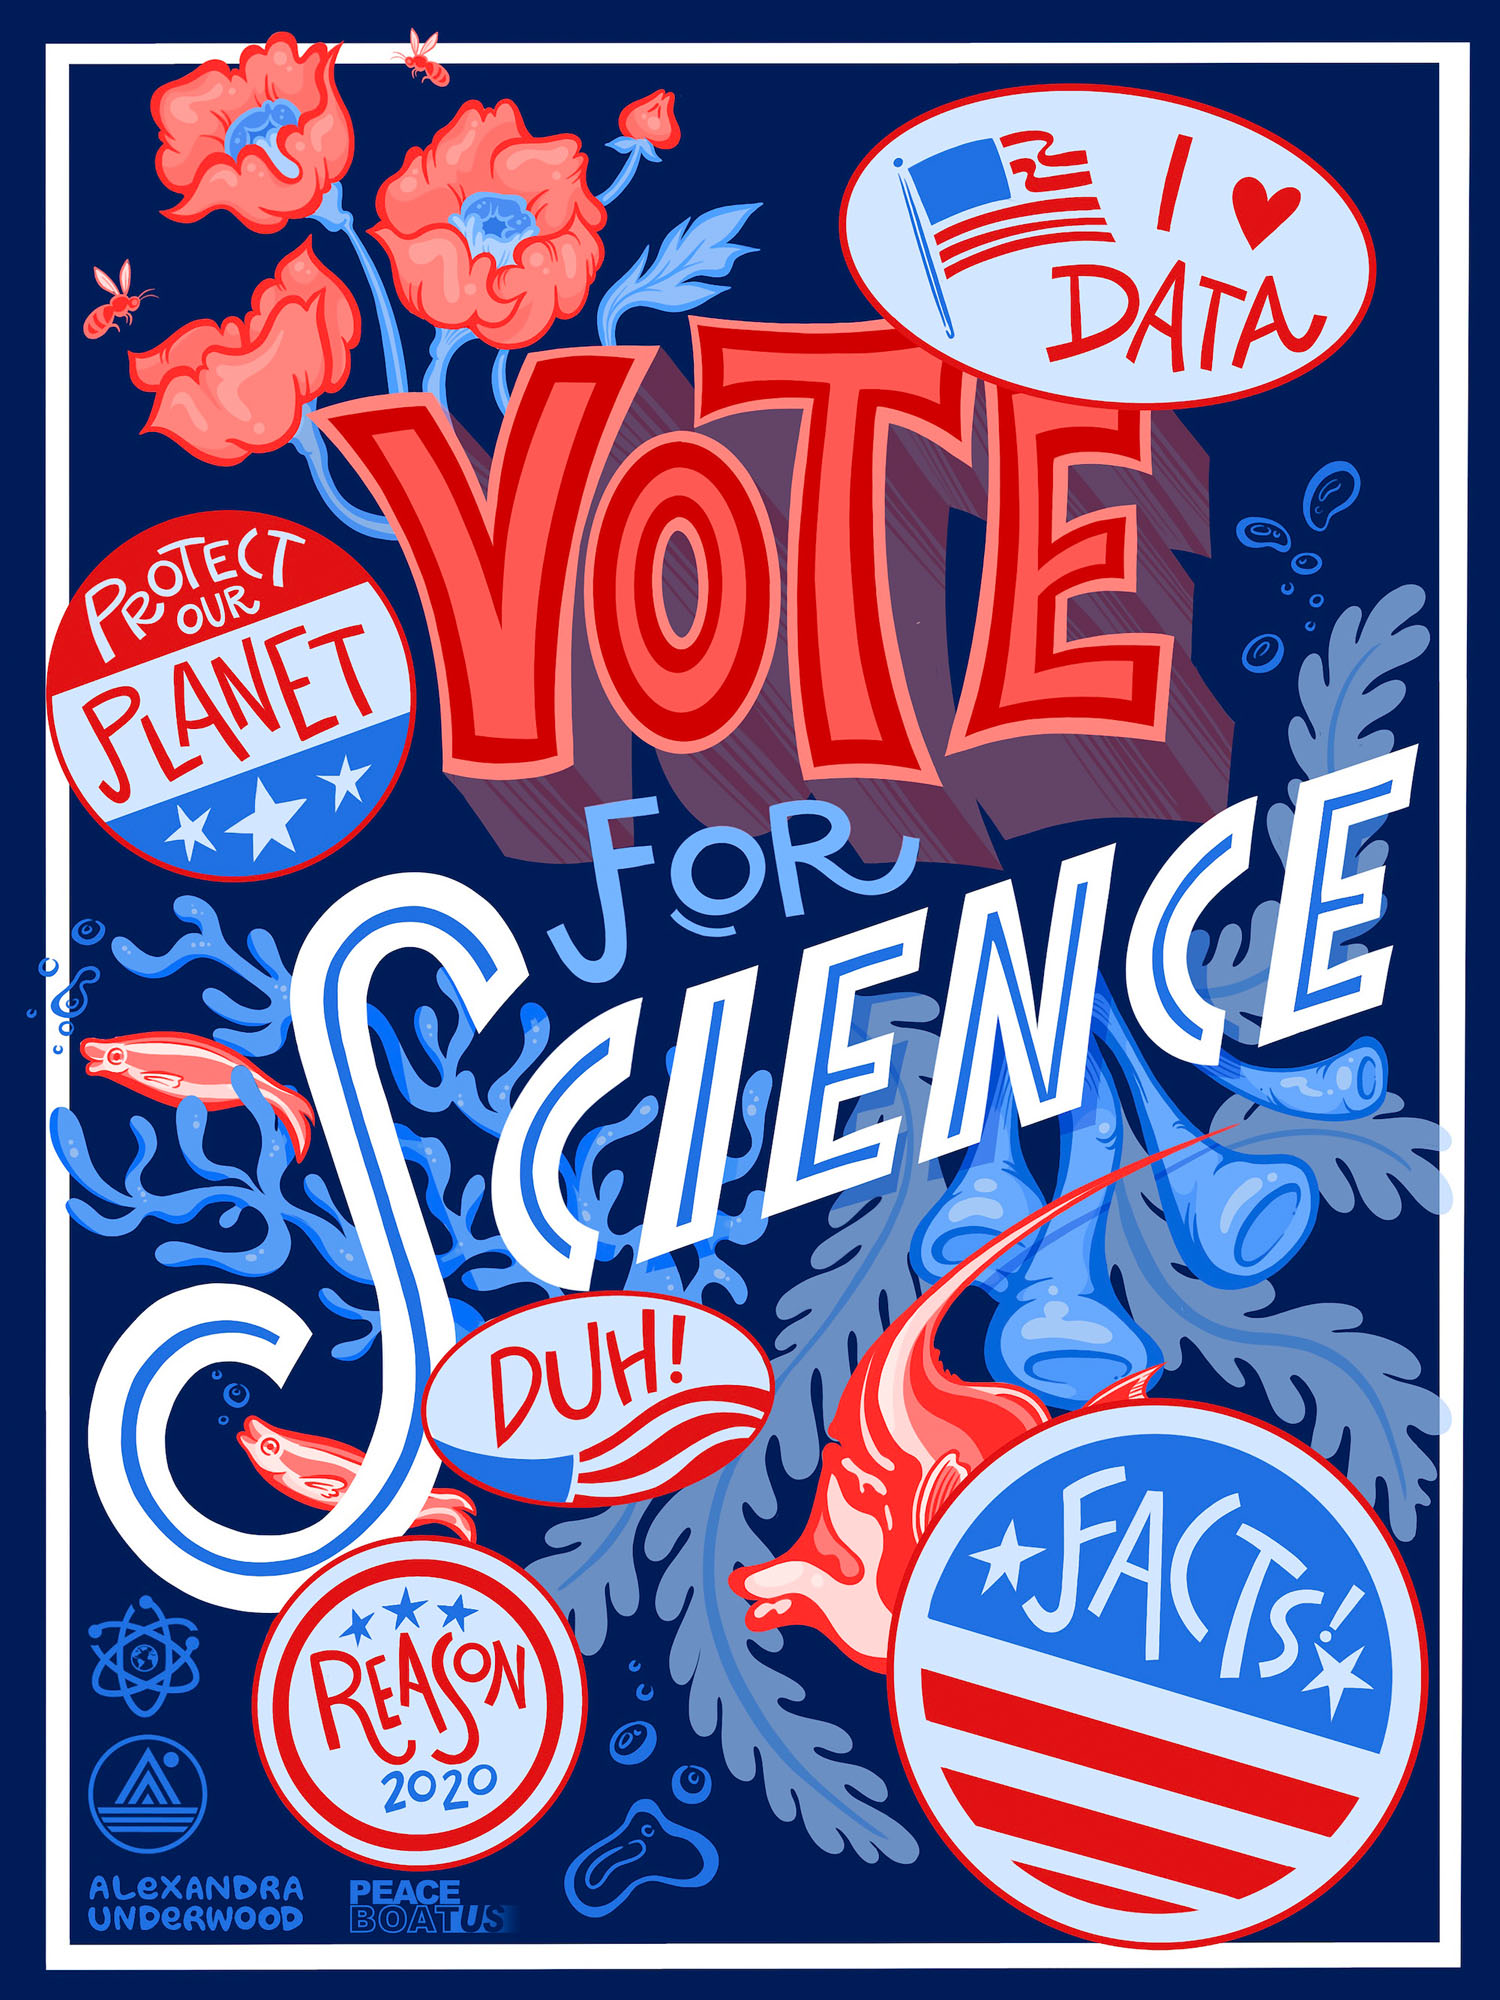 Vote for Science